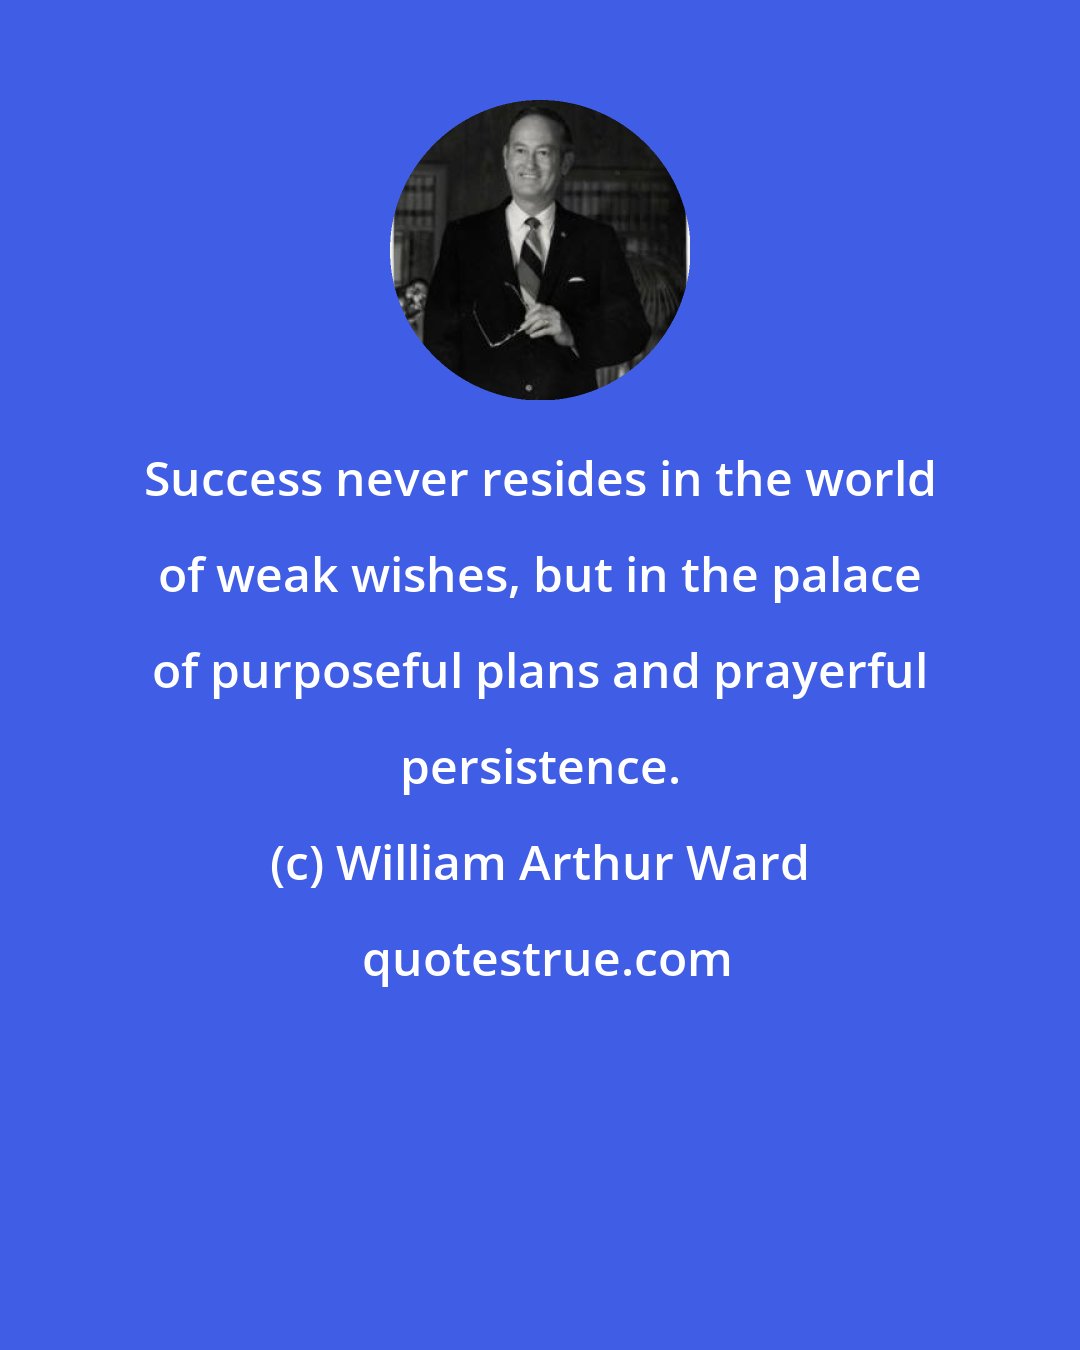 William Arthur Ward: Success never resides in the world of weak wishes, but in the palace of purposeful plans and prayerful persistence.